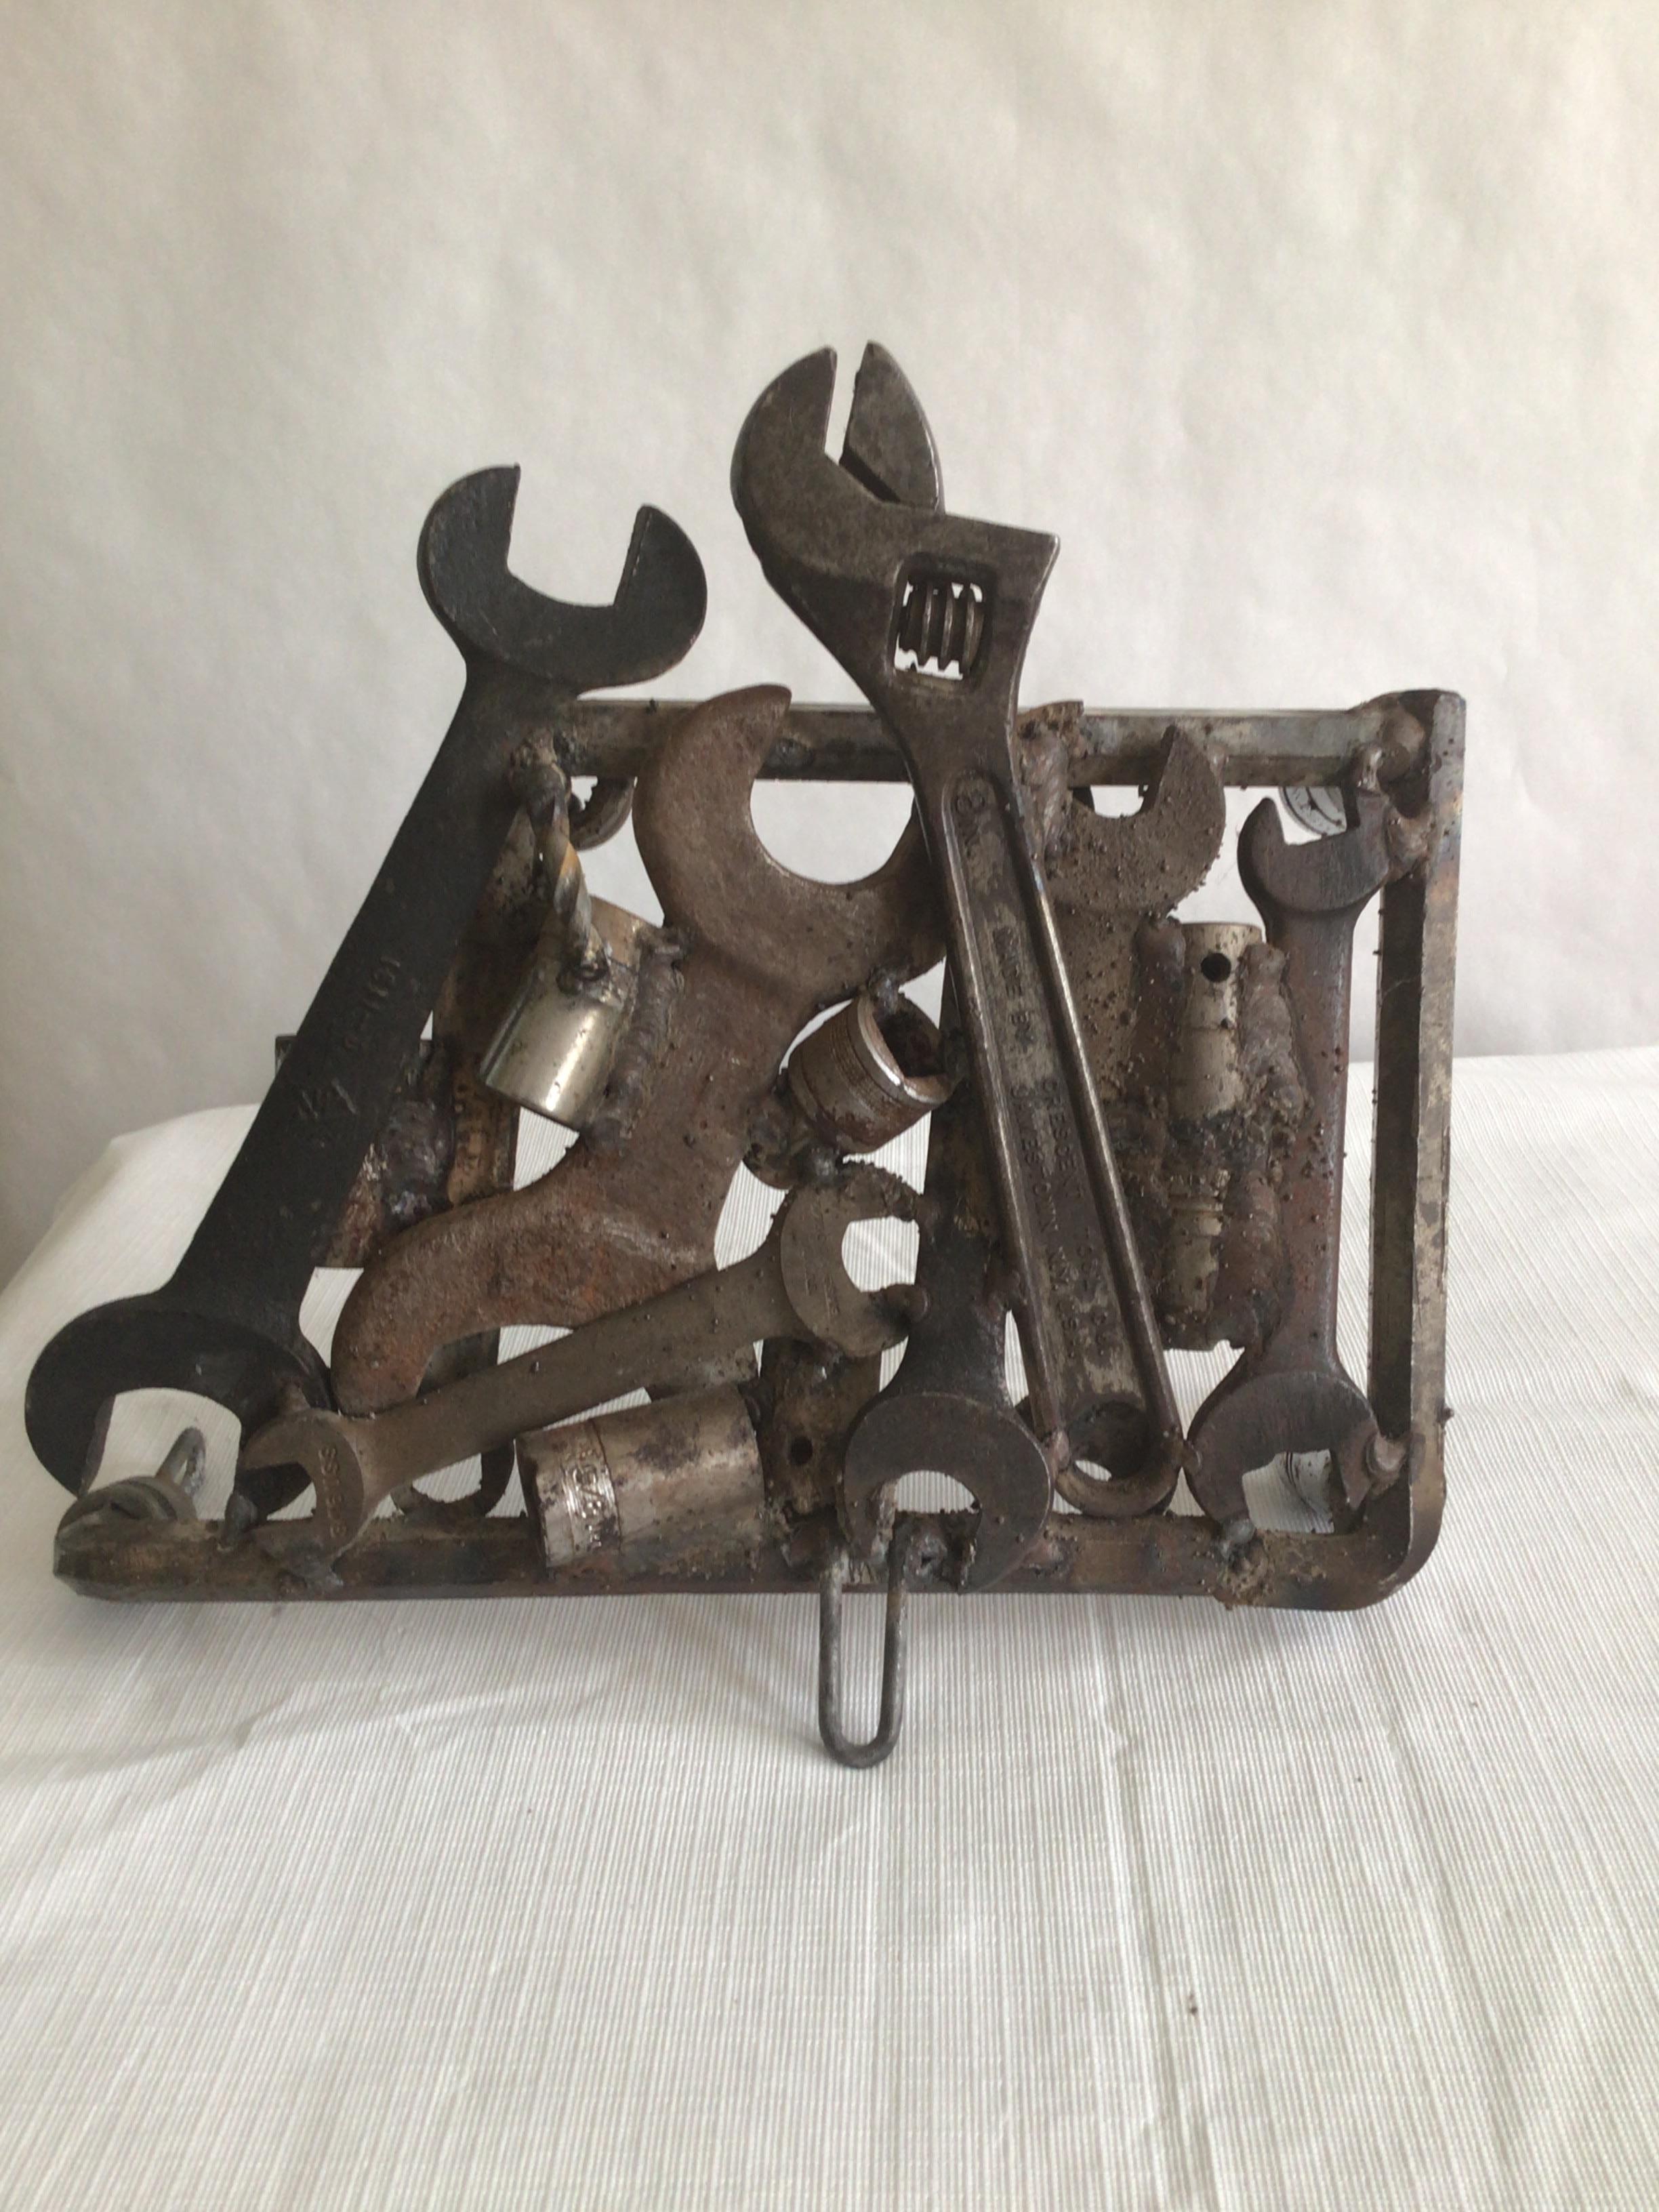 1970s industrial Wrench sculpture.